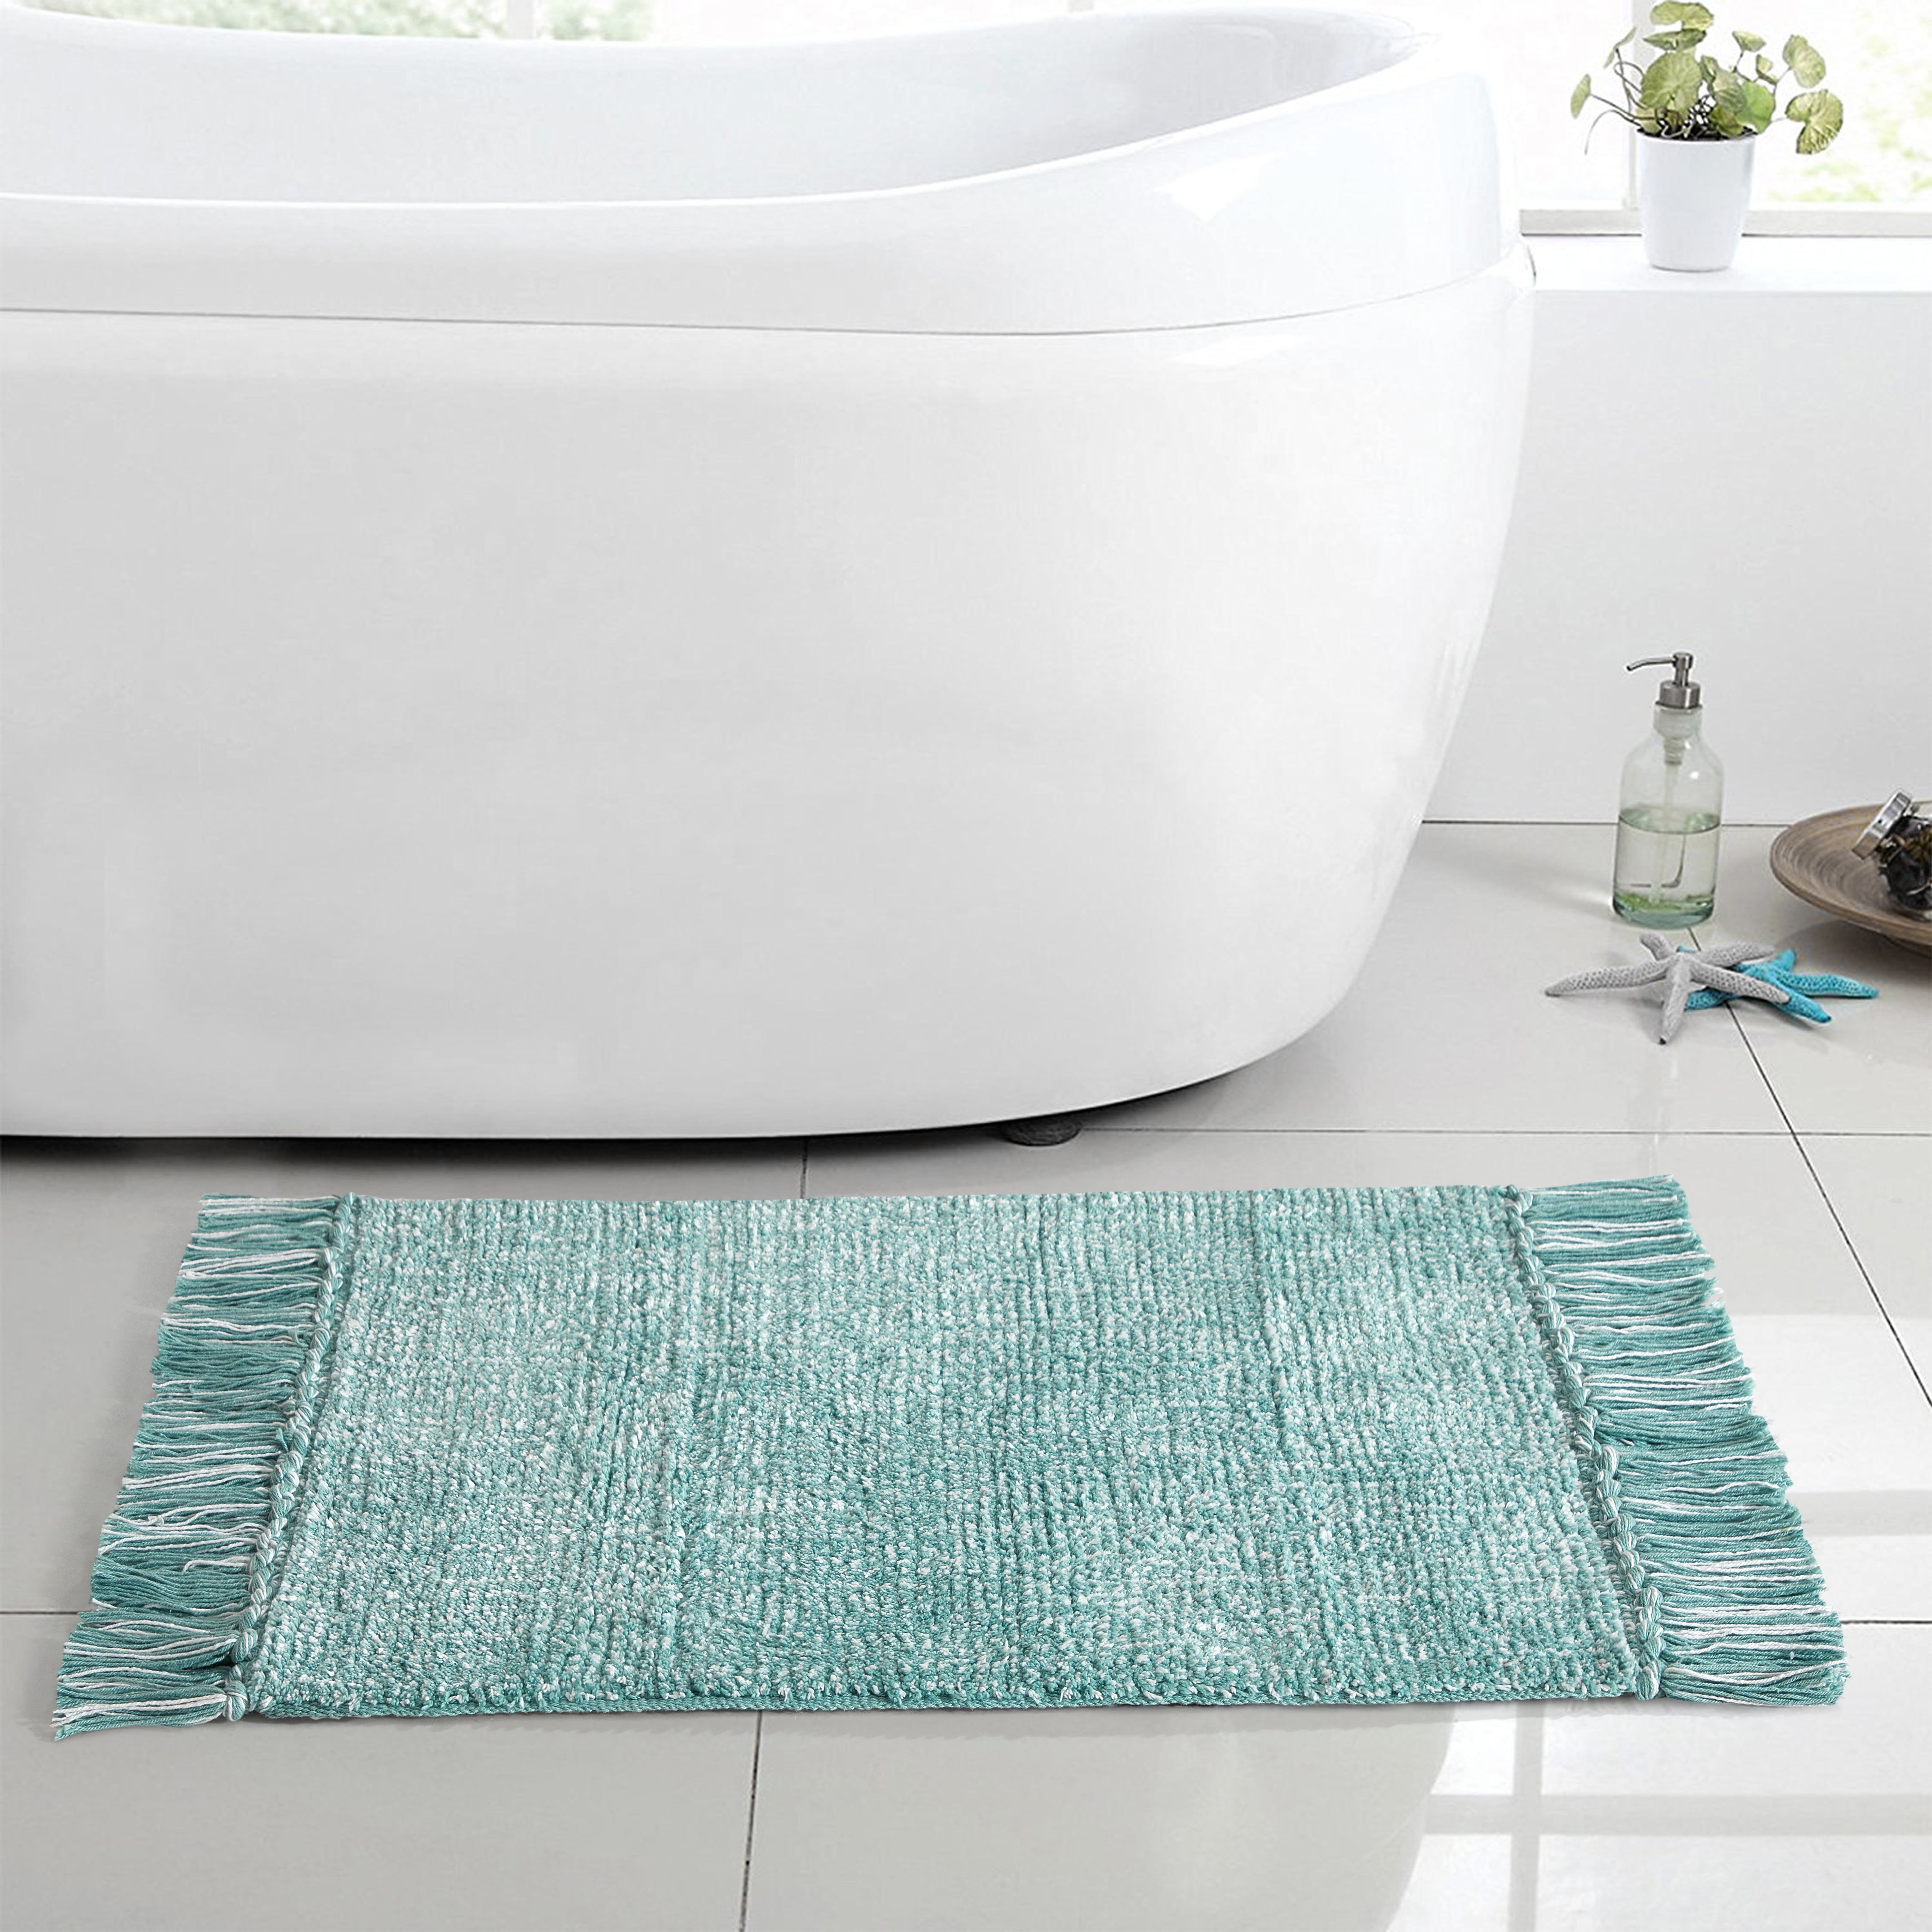  Lucky Brand Overtufted Cotton Fringe Bath Rug with Tassels,  20x32, Navy Blue : Home & Kitchen